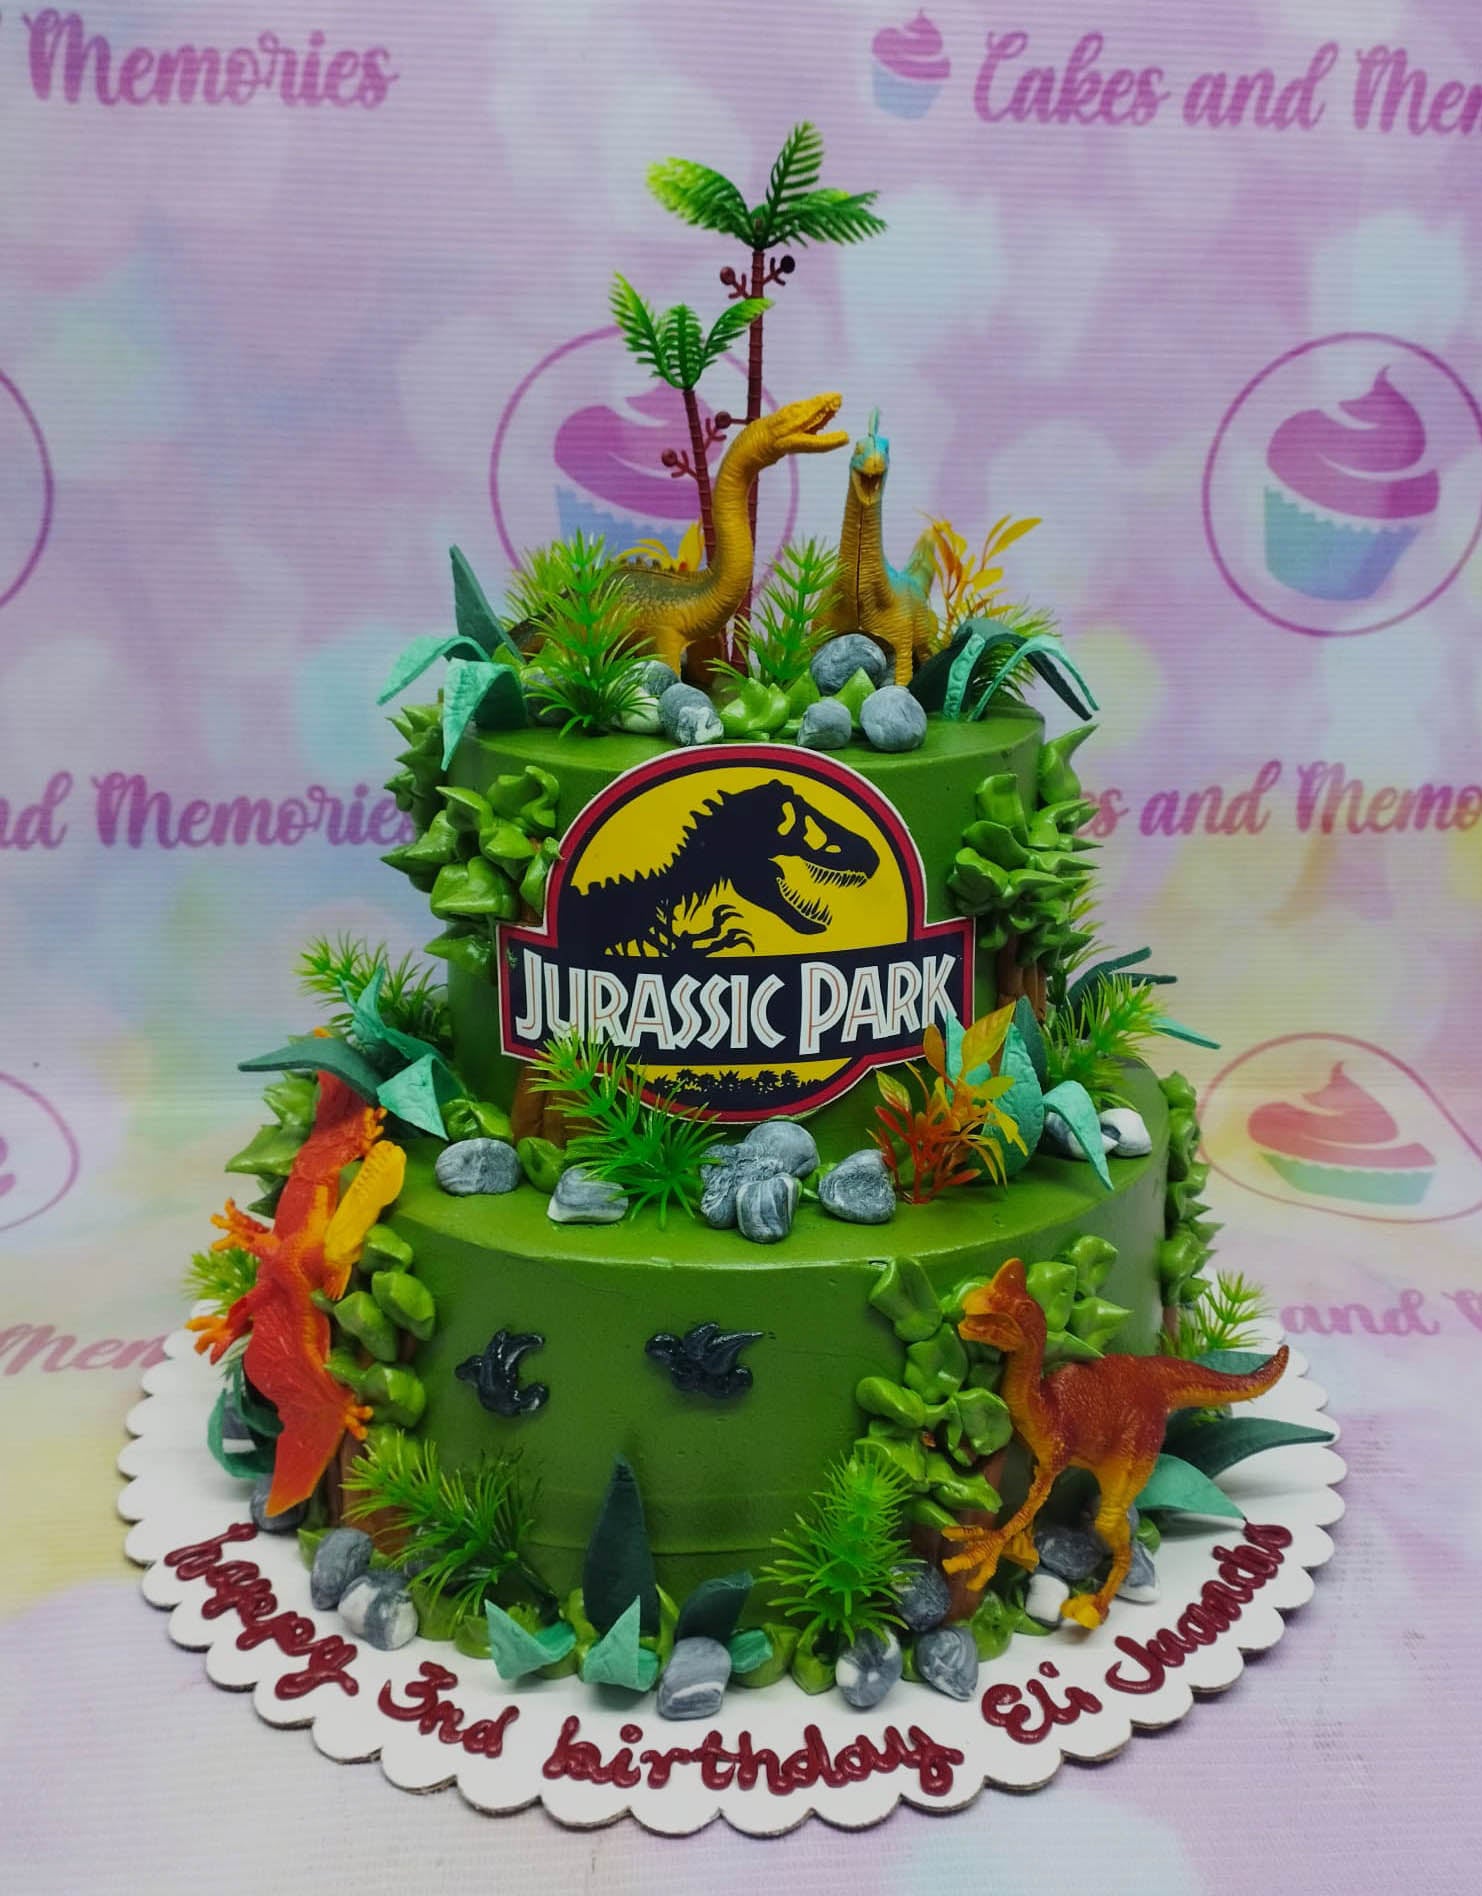 Dinosaurs Cake - 1120 – Cakes and Memories Bakeshop